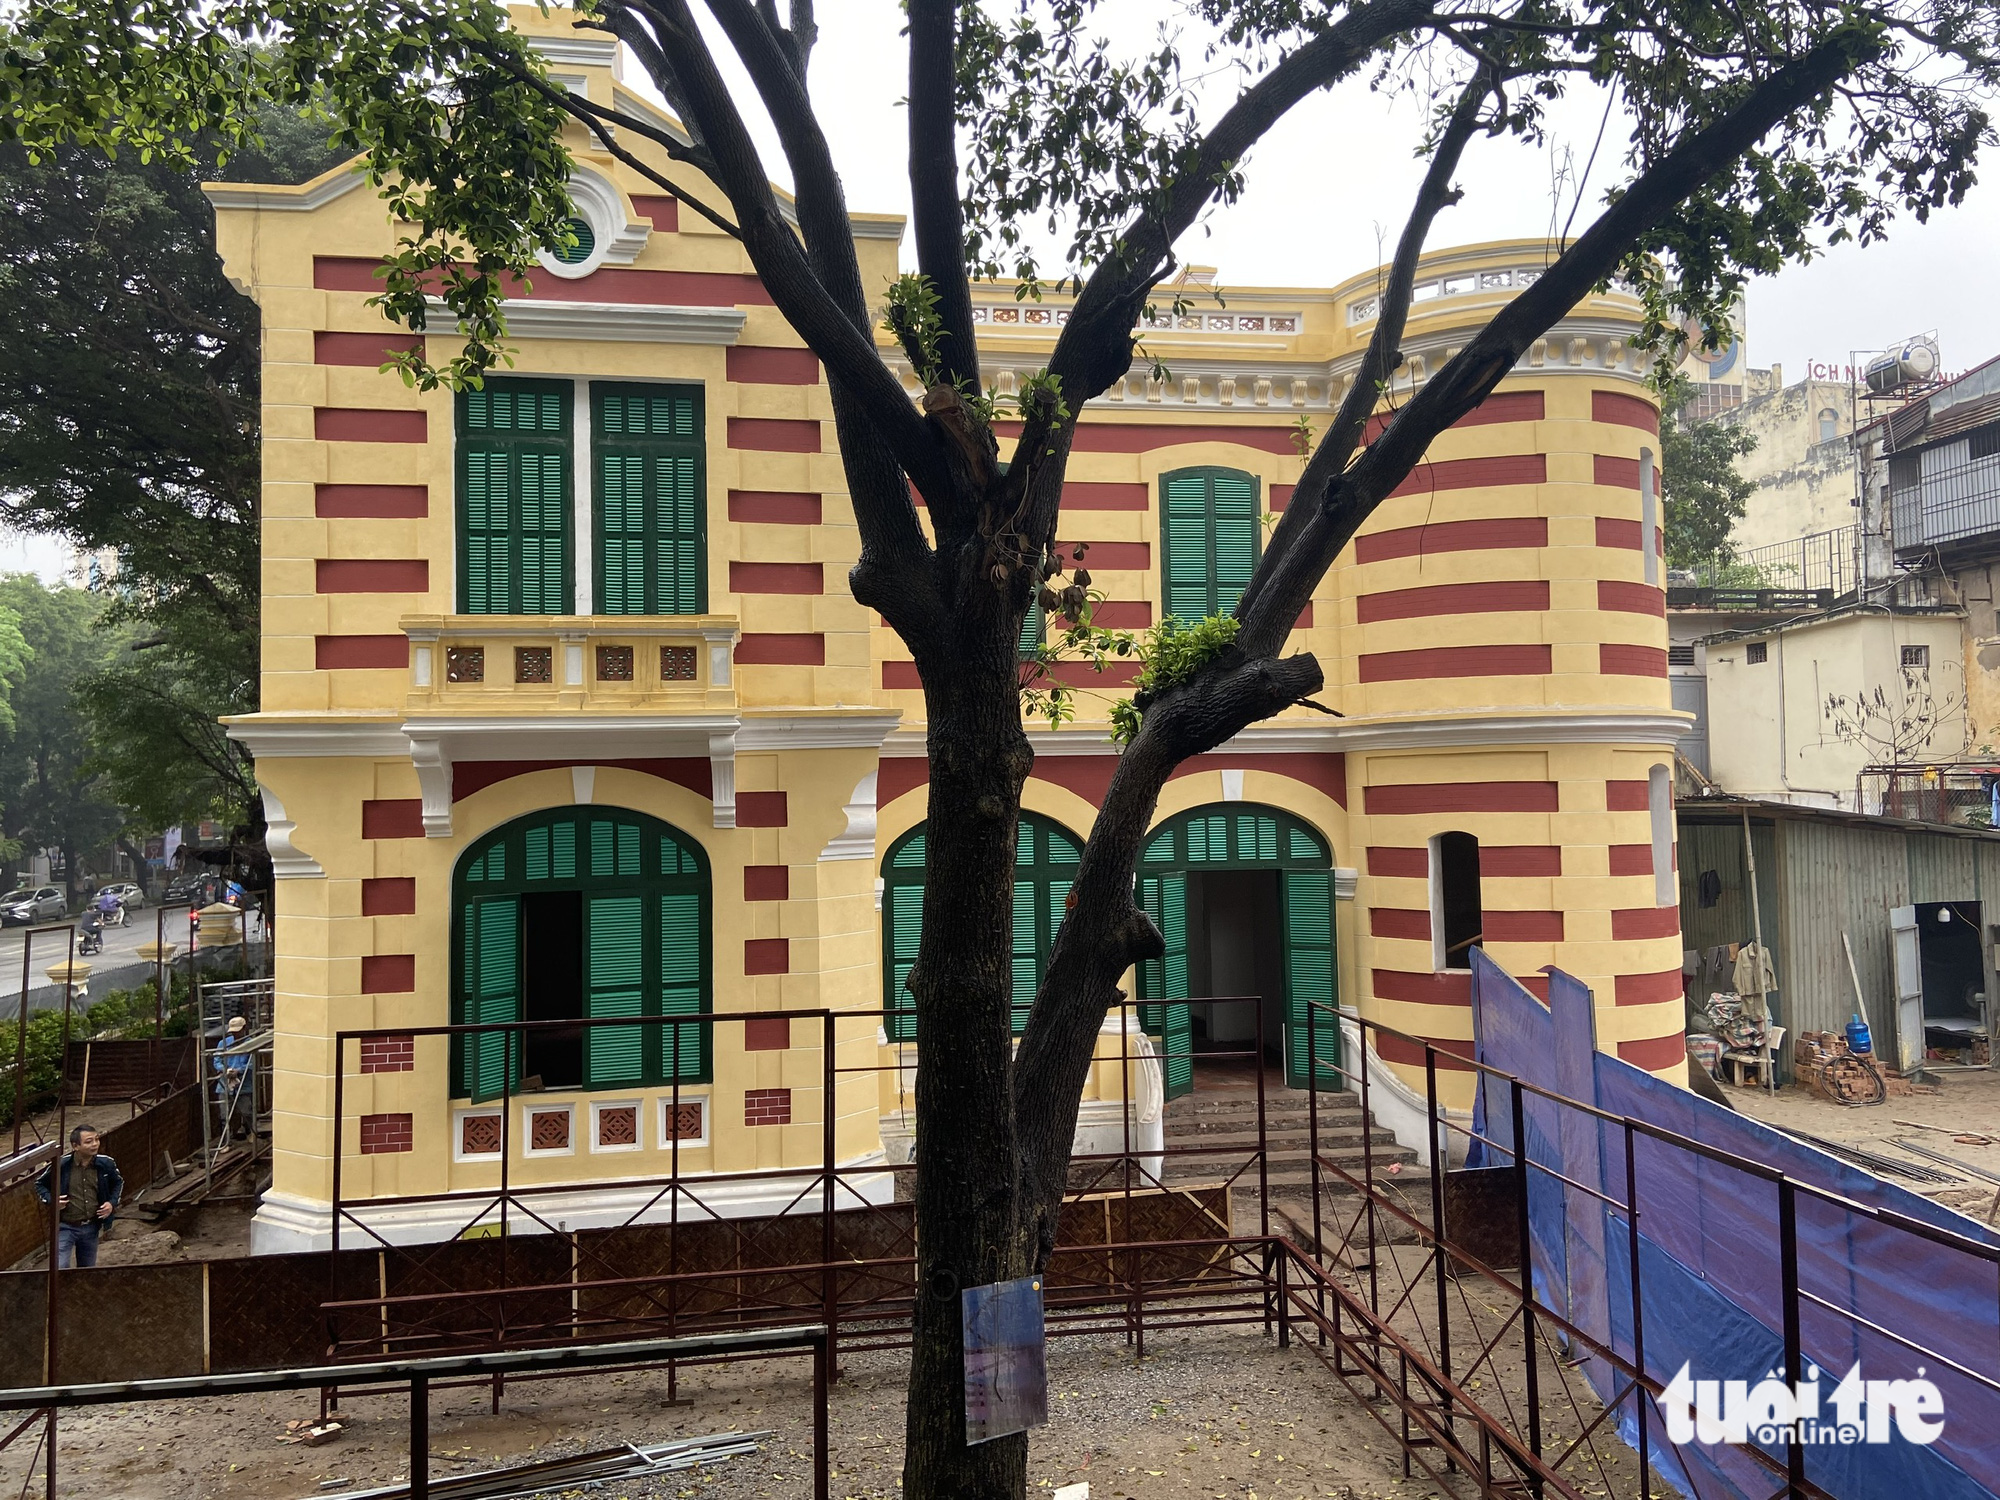 The old French villa at 49 Tran Hung Dao Street in Hoan Kiem District, Hanoi is seen with new color washing paints. Photo: T. Dieu / Tuoi Tre